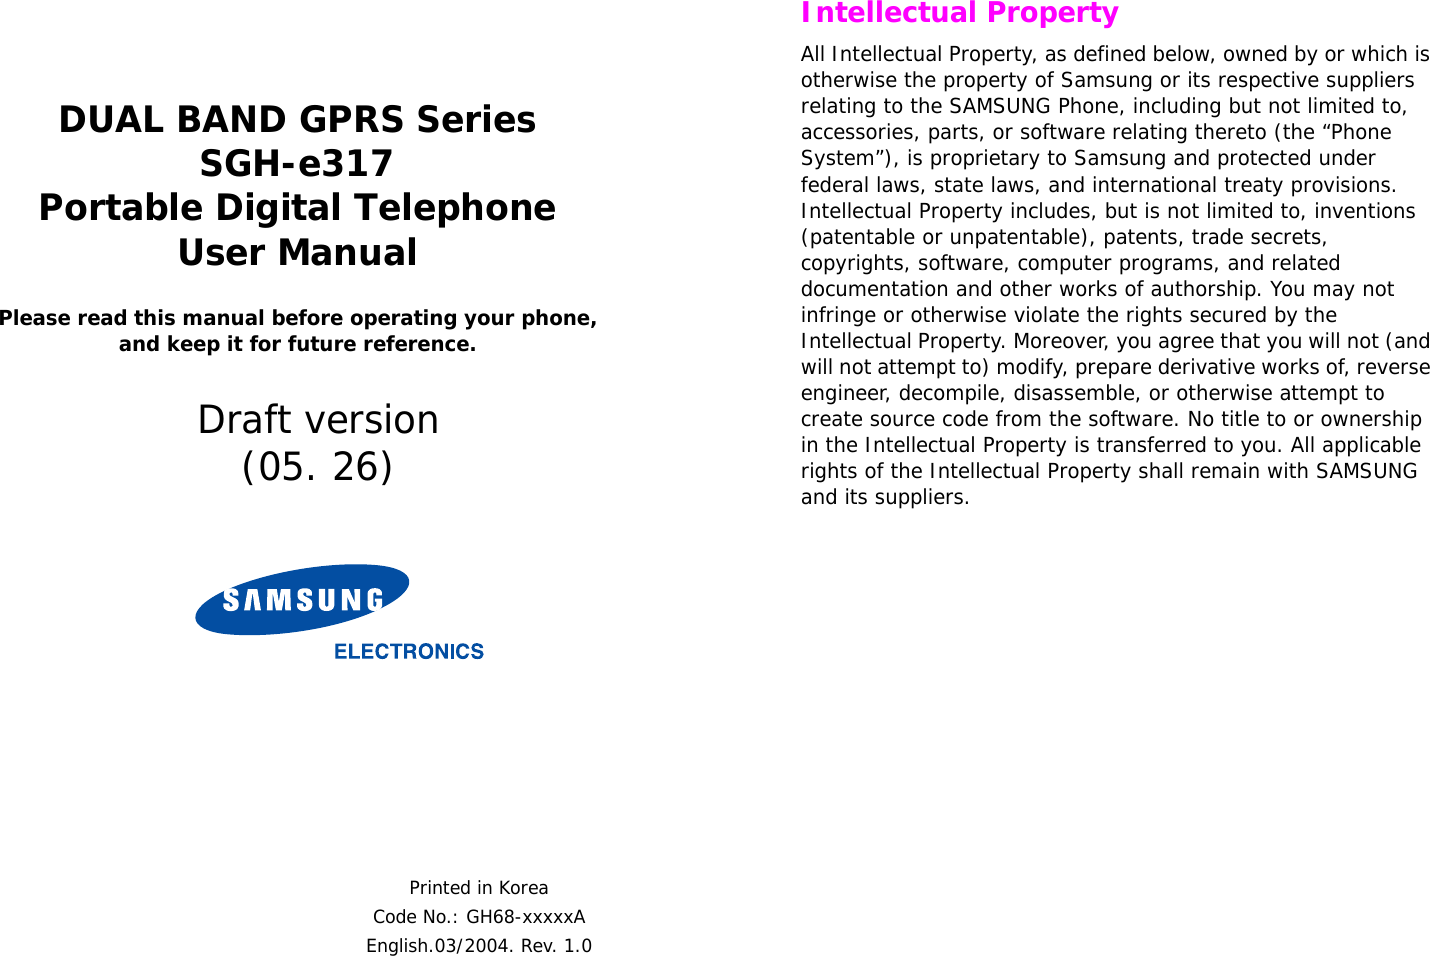  DUAL BAND GPRS SeriesSGH-e317Portable Digital TelephoneUser ManualPlease read this manual before operating your phone, and keep it for future reference.Printed in KoreaCode No.: GH68-xxxxxAEnglish.03/2004. Rev. 1.0Draft version(05. 26) Intellectual PropertyAll Intellectual Property, as defined below, owned by or which is otherwise the property of Samsung or its respective suppliers relating to the SAMSUNG Phone, including but not limited to, accessories, parts, or software relating thereto (the “Phone System”), is proprietary to Samsung and protected under federal laws, state laws, and international treaty provisions. Intellectual Property includes, but is not limited to, inventions (patentable or unpatentable), patents, trade secrets, copyrights, software, computer programs, and related documentation and other works of authorship. You may not infringe or otherwise violate the rights secured by the Intellectual Property. Moreover, you agree that you will not (and will not attempt to) modify, prepare derivative works of, reverse engineer, decompile, disassemble, or otherwise attempt to create source code from the software. No title to or ownership in the Intellectual Property is transferred to you. All applicable rights of the Intellectual Property shall remain with SAMSUNG and its suppliers.